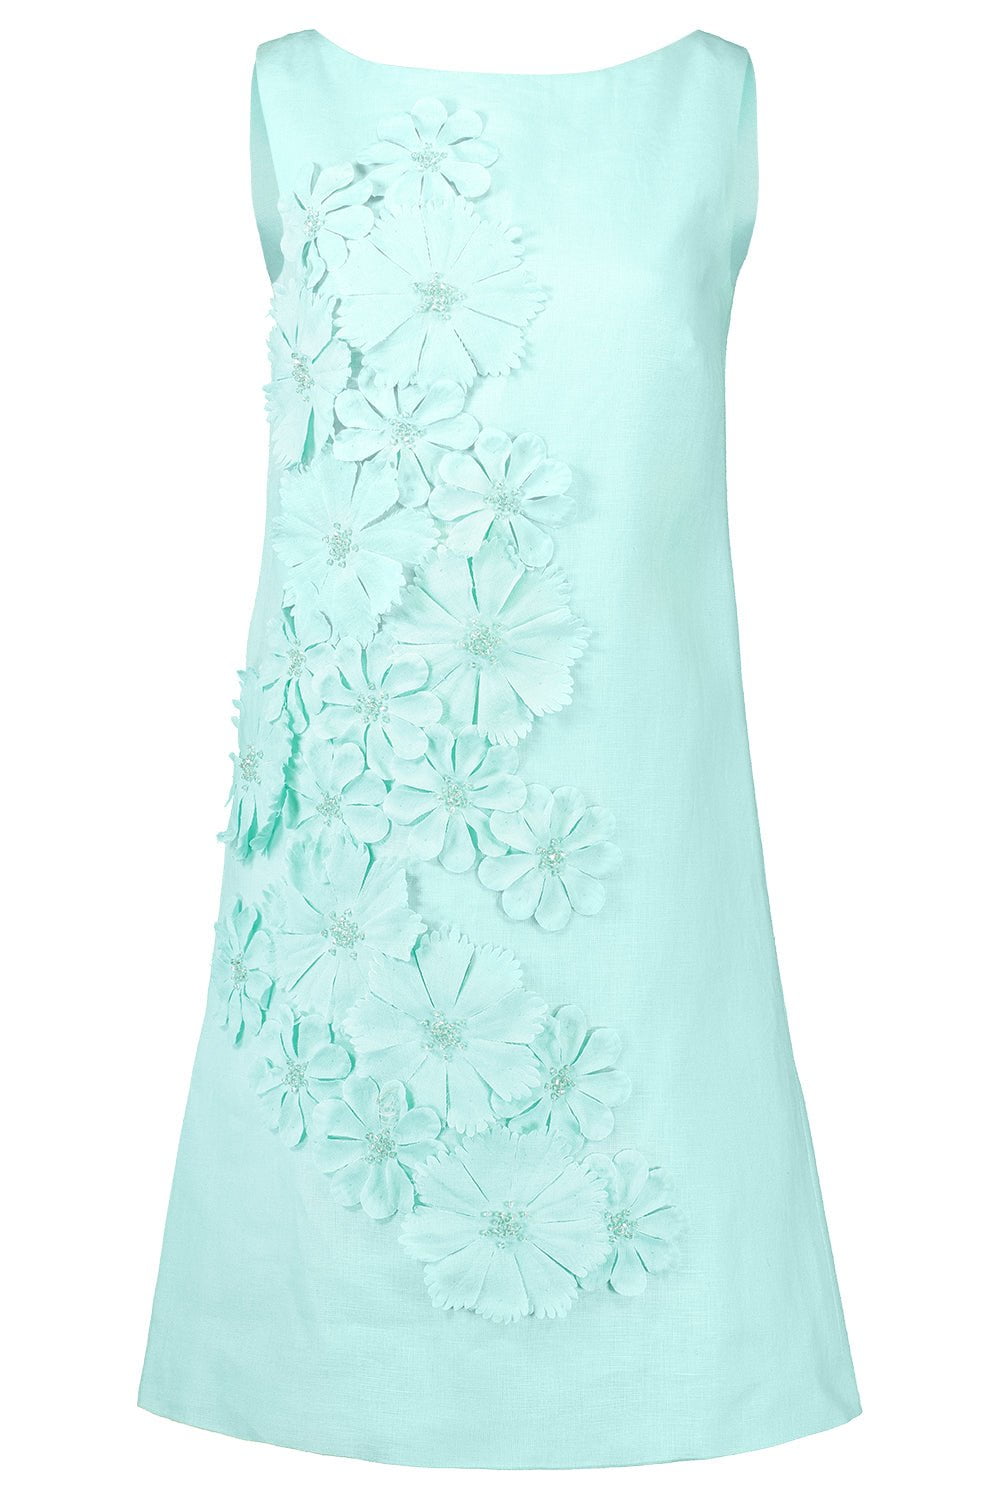 CATHERINE REGEHR-Sleeveless Floral Embroidered Dress-